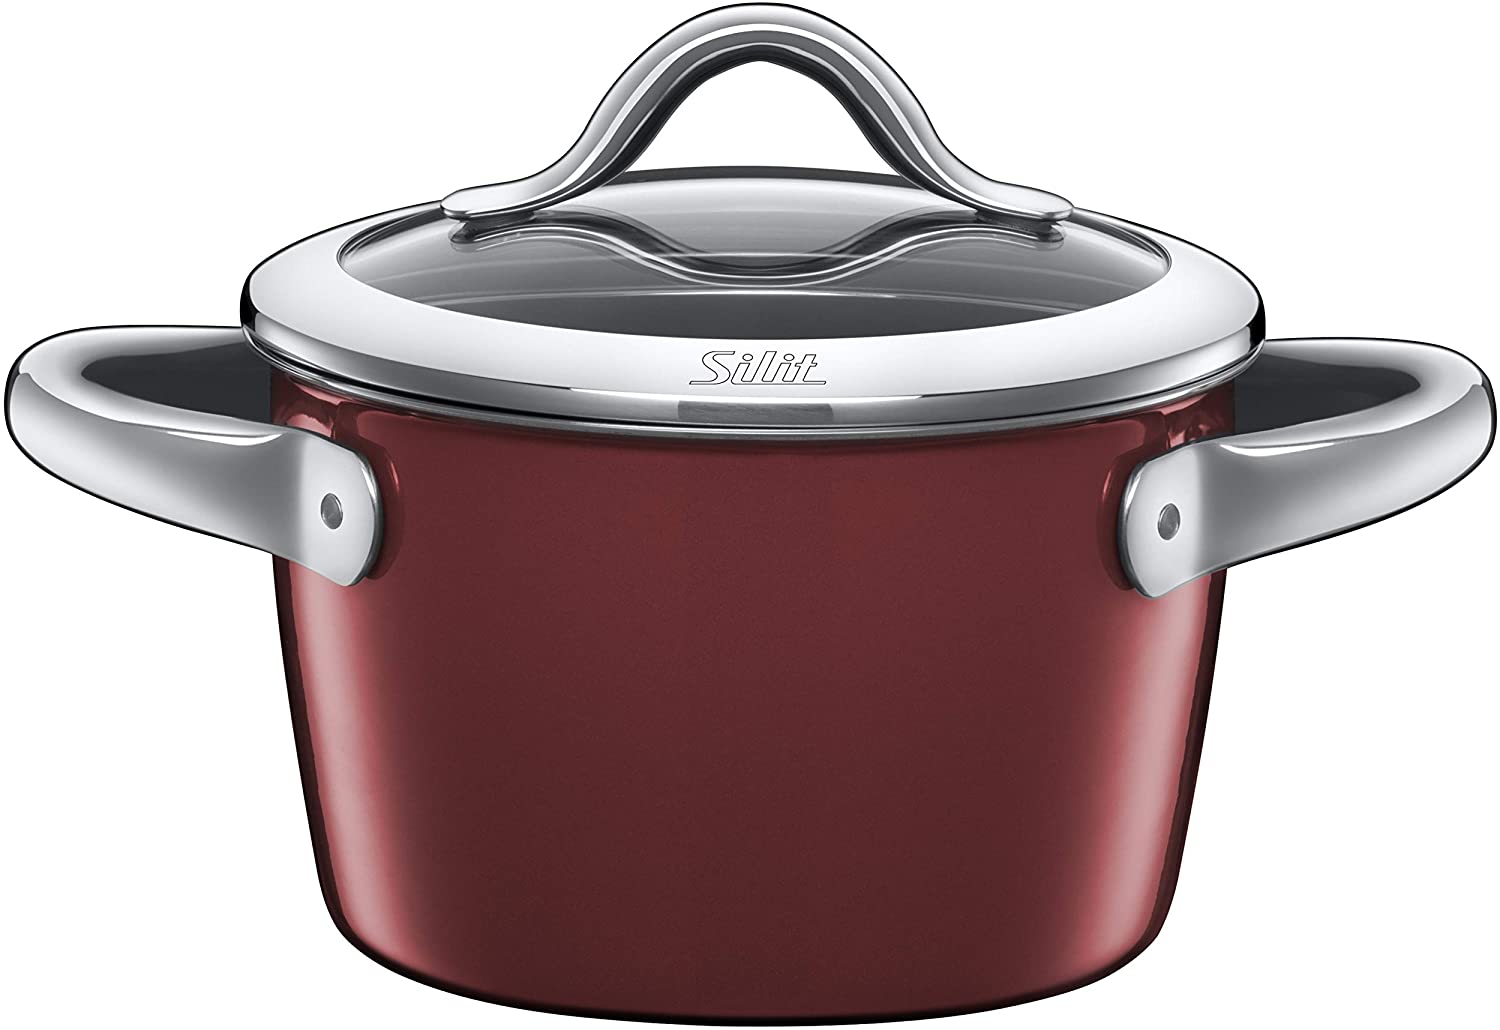 Silit Vitaliano Rosso Cooking Pot Tall with Glass Lid